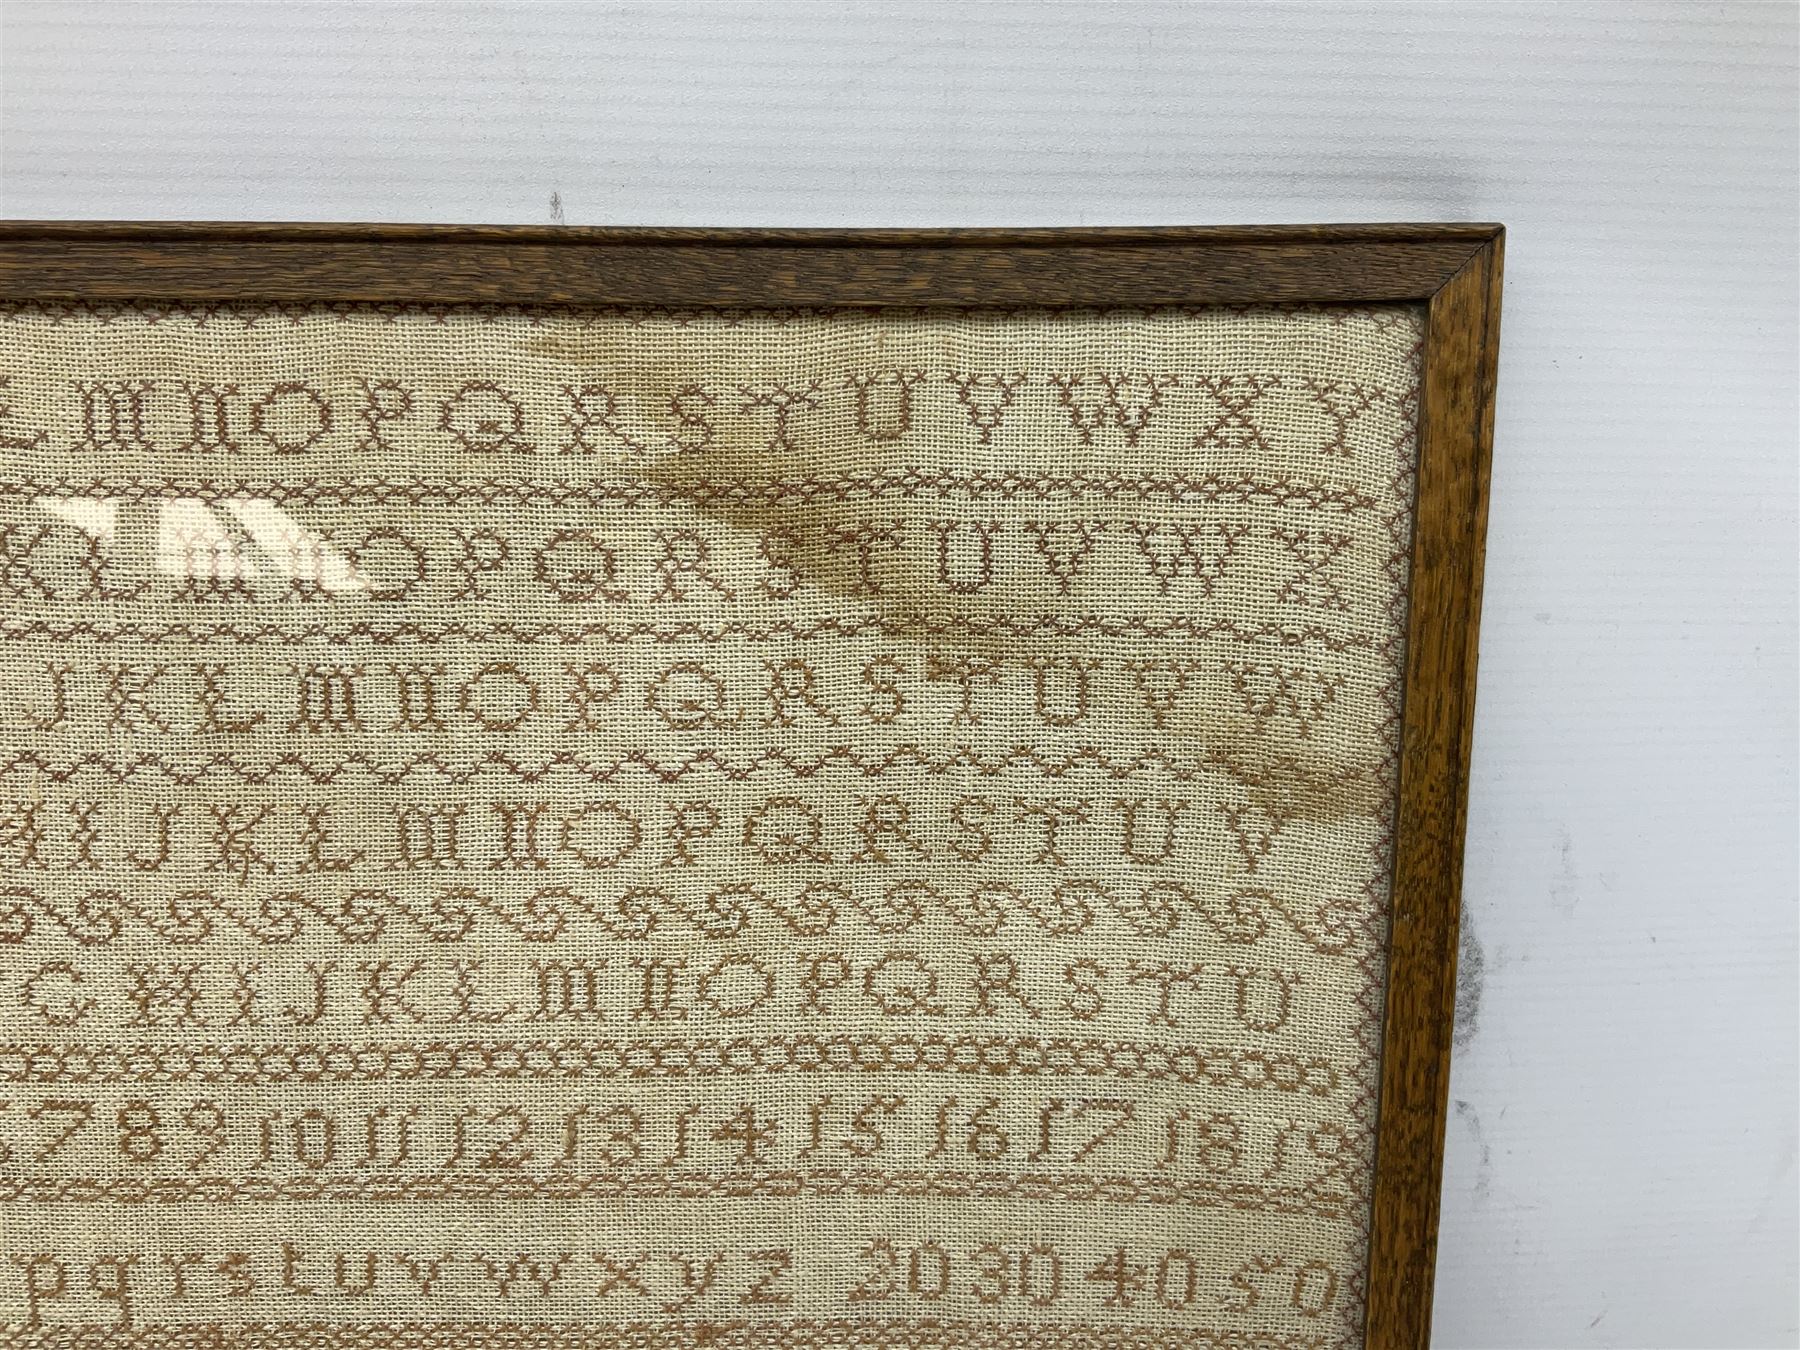 Victorian sampler by Martha Emily Cooper Aged 10 Years 1857 - Image 2 of 5